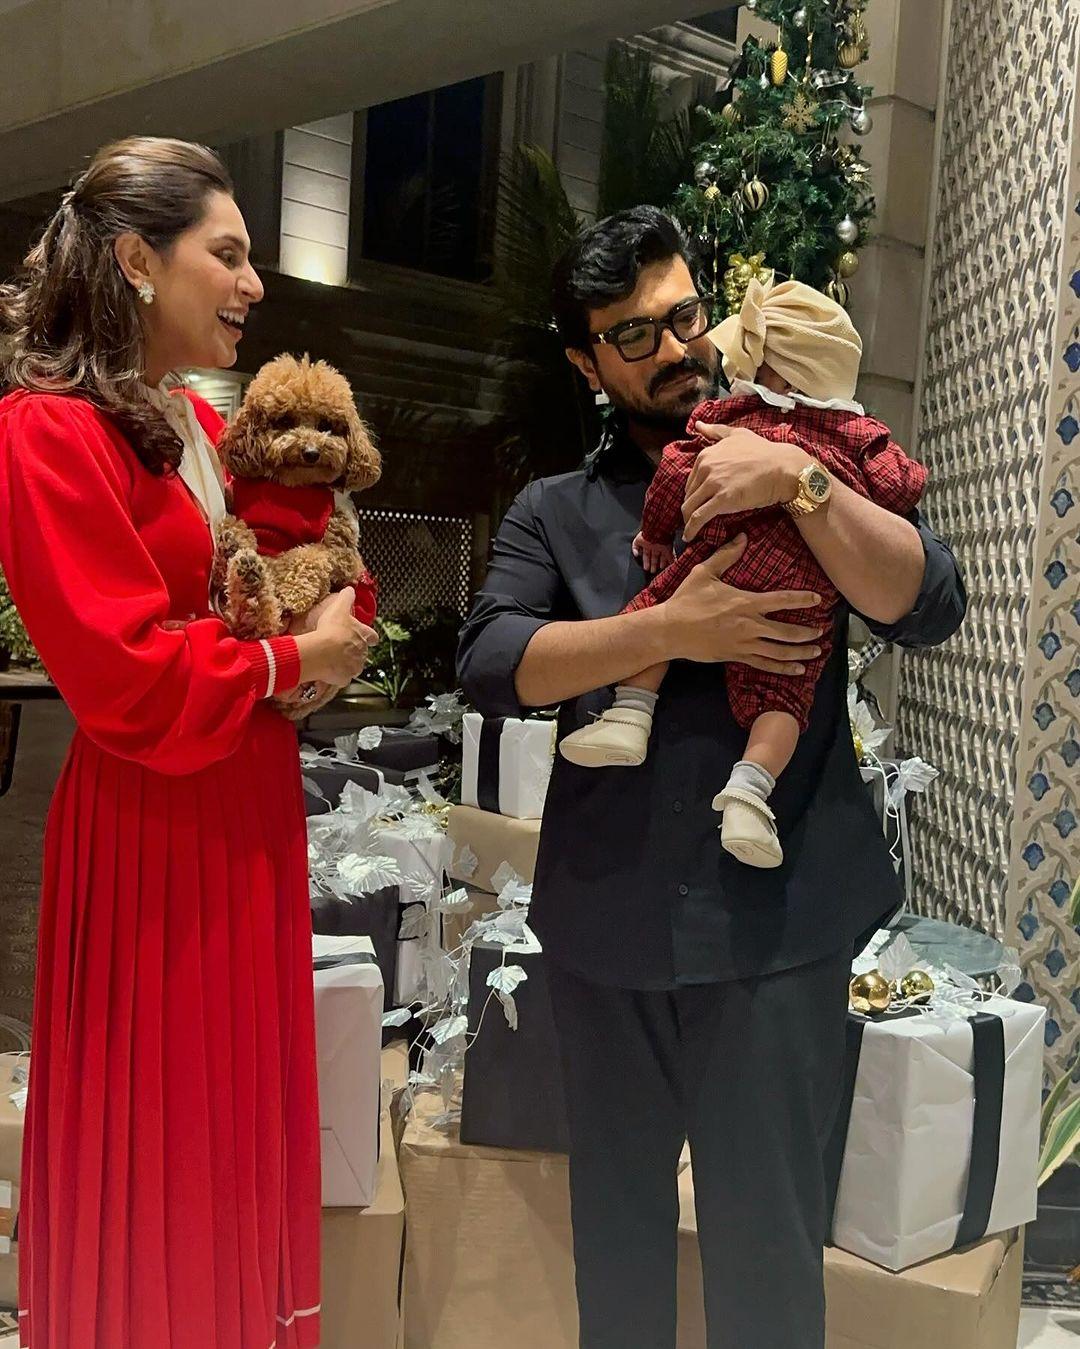 In the picture, Ram holds Klin Kaara in his arms, gazing at her with pure admiration and love. Upasana, dressed in a captivating red dress, complements Ram's dapper look in a crisp black shirt. Klin Kaara steals the show in a plaid Christmas onesie paired with a stylish head wrap.